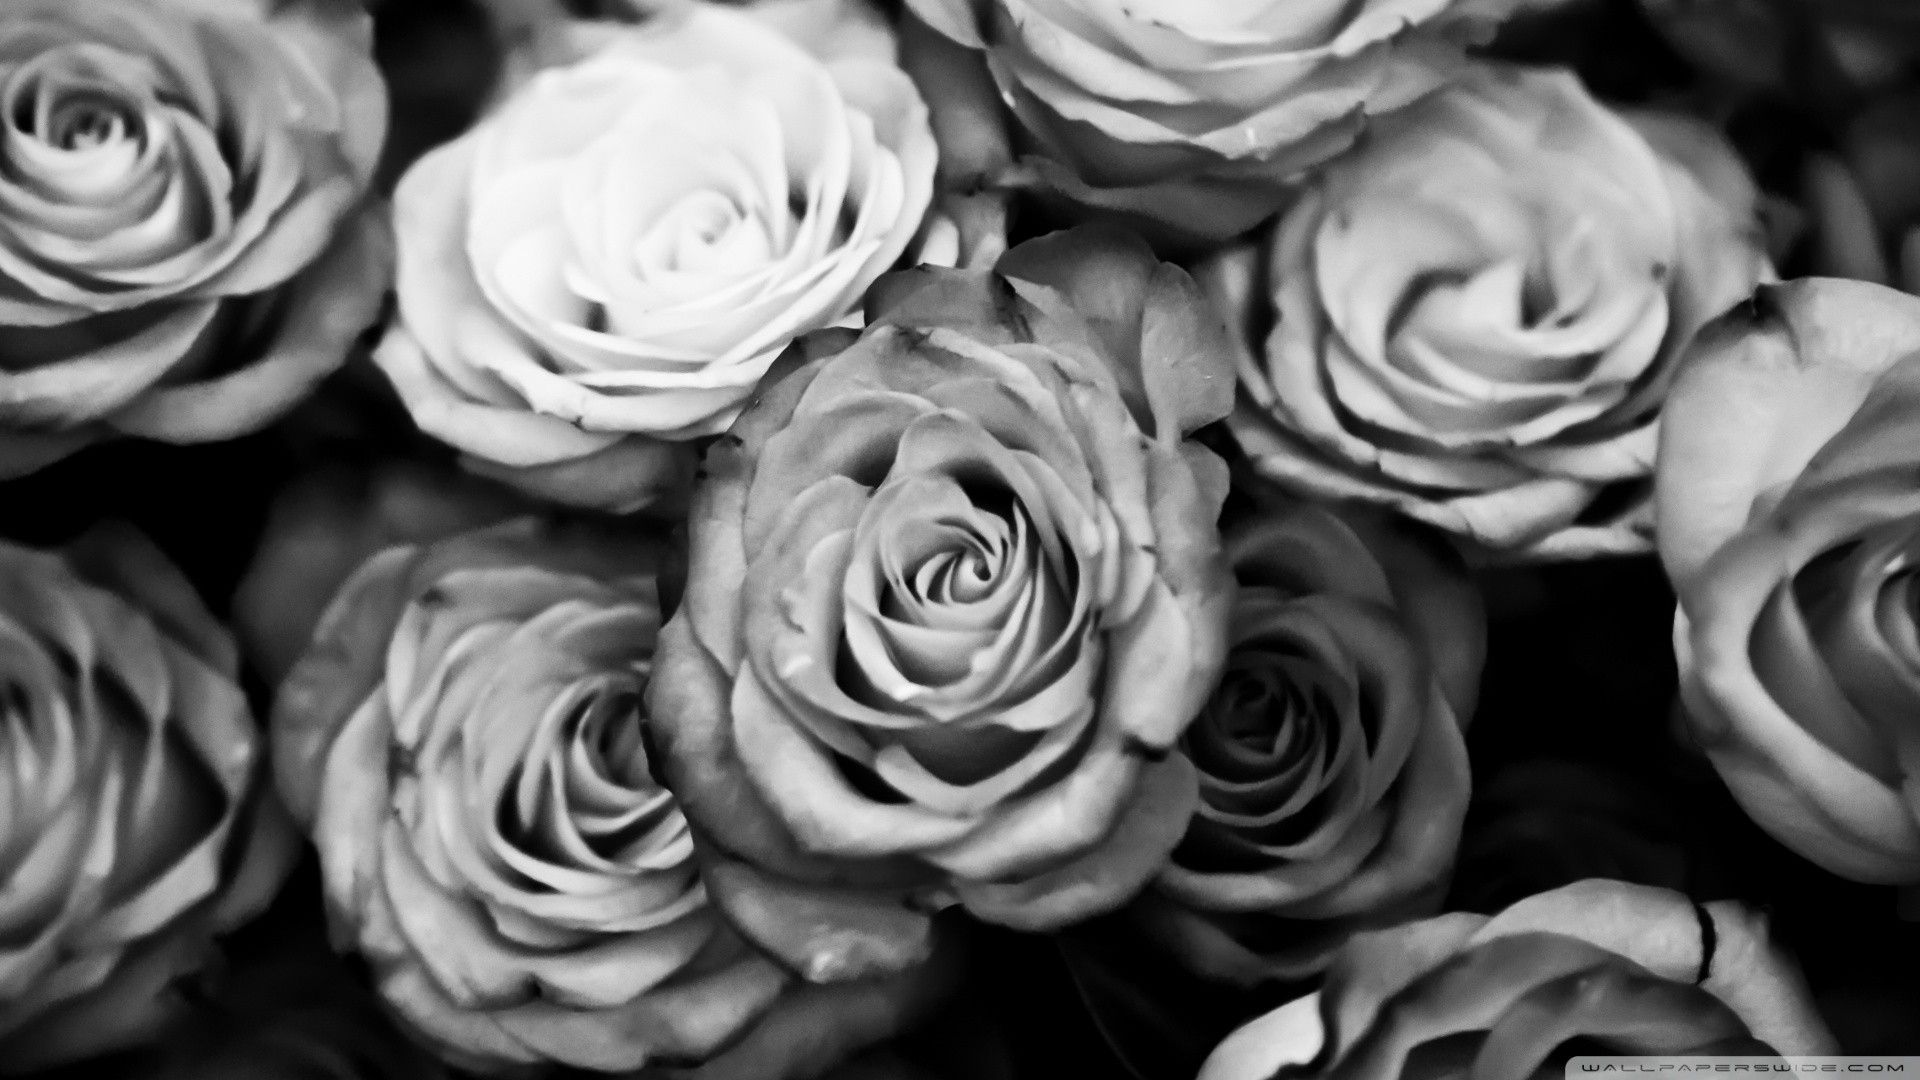 Black and white roses wallpaper for your computer desktop - Black and white